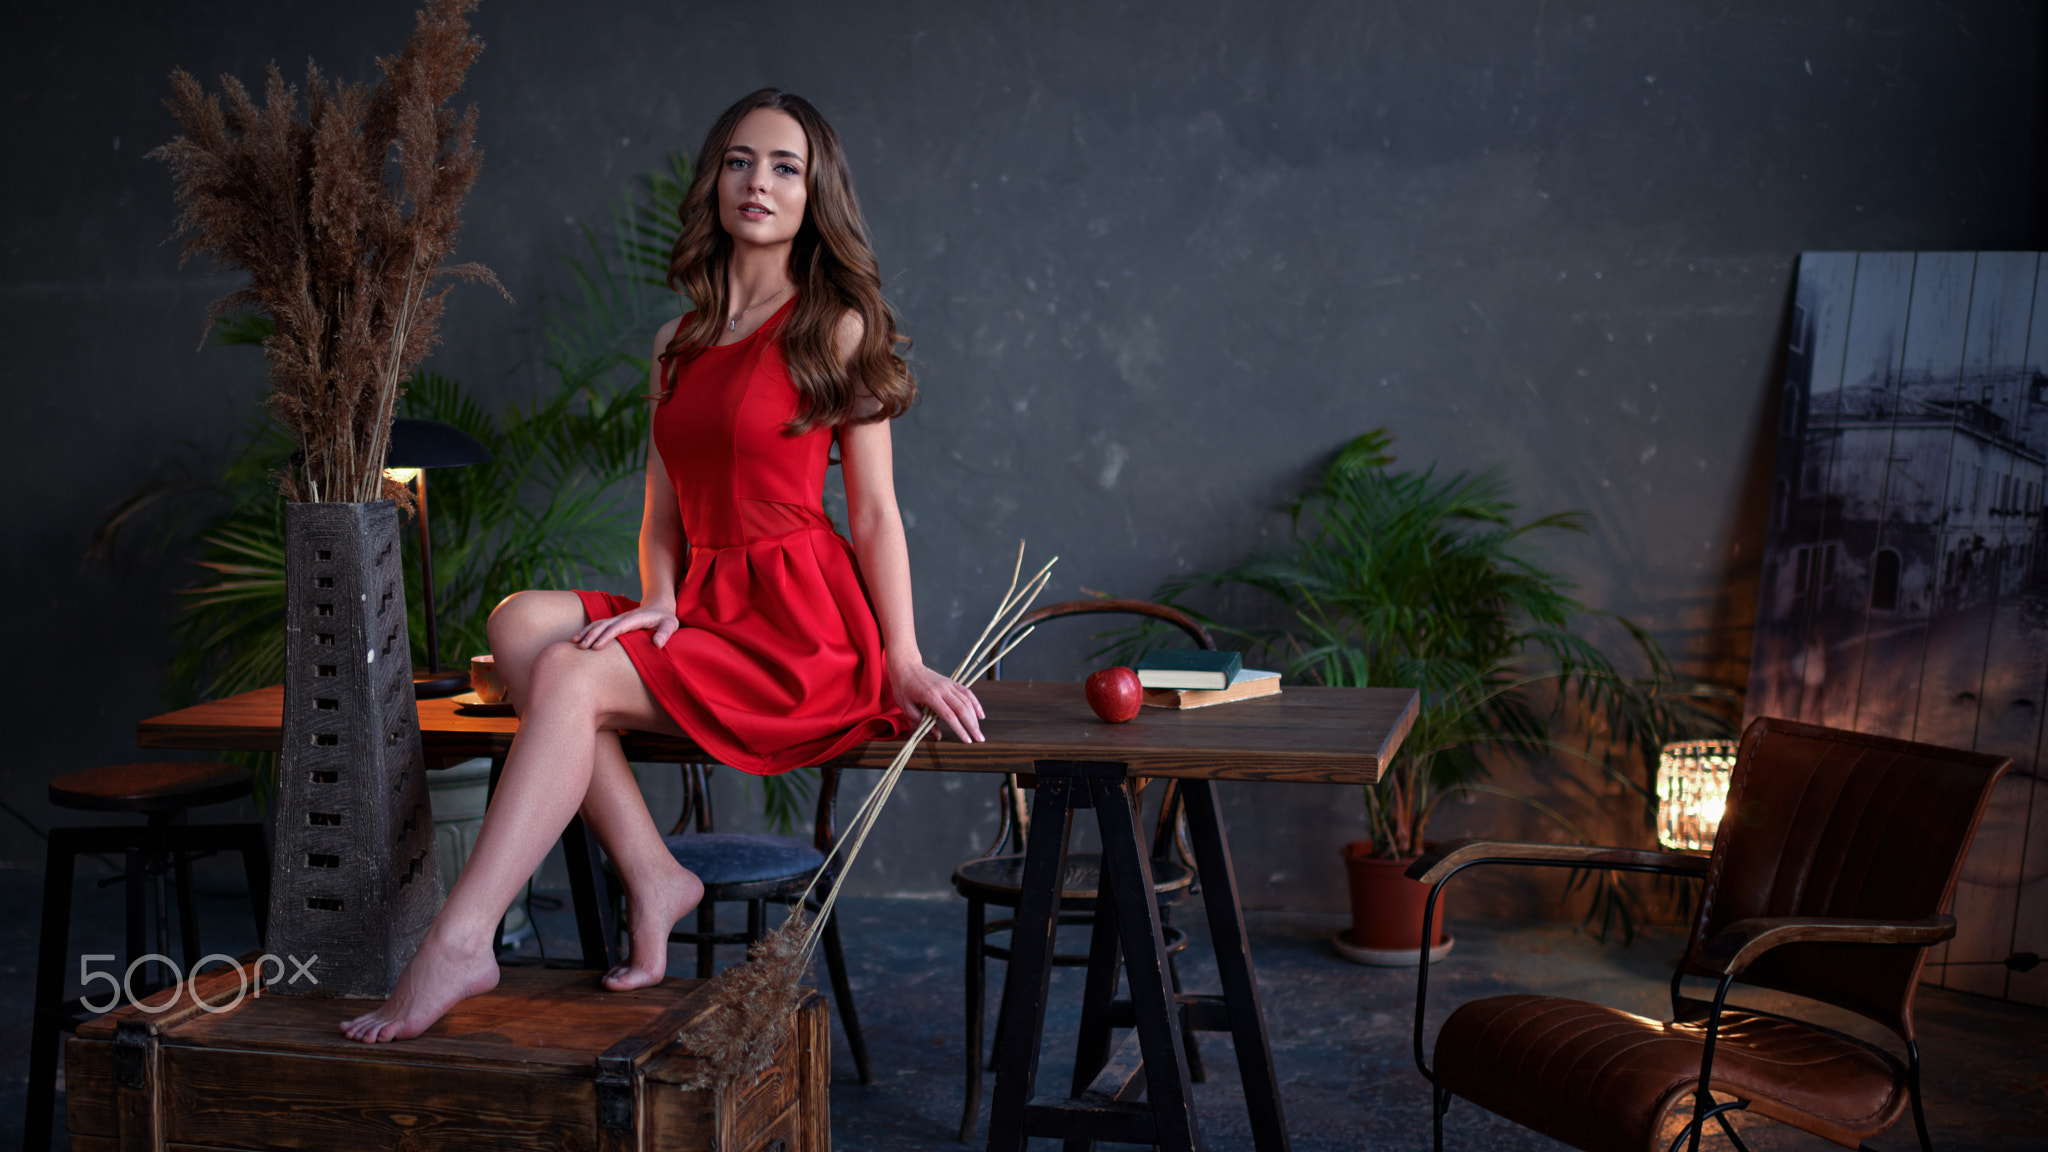 People 2048x1152 Sergey Olshevsky women brunette long hair wavy hair dress makeup looking at viewer jewelry necklace plants table barefoot apples books chair 500px red dress pointed toes sitting on desk